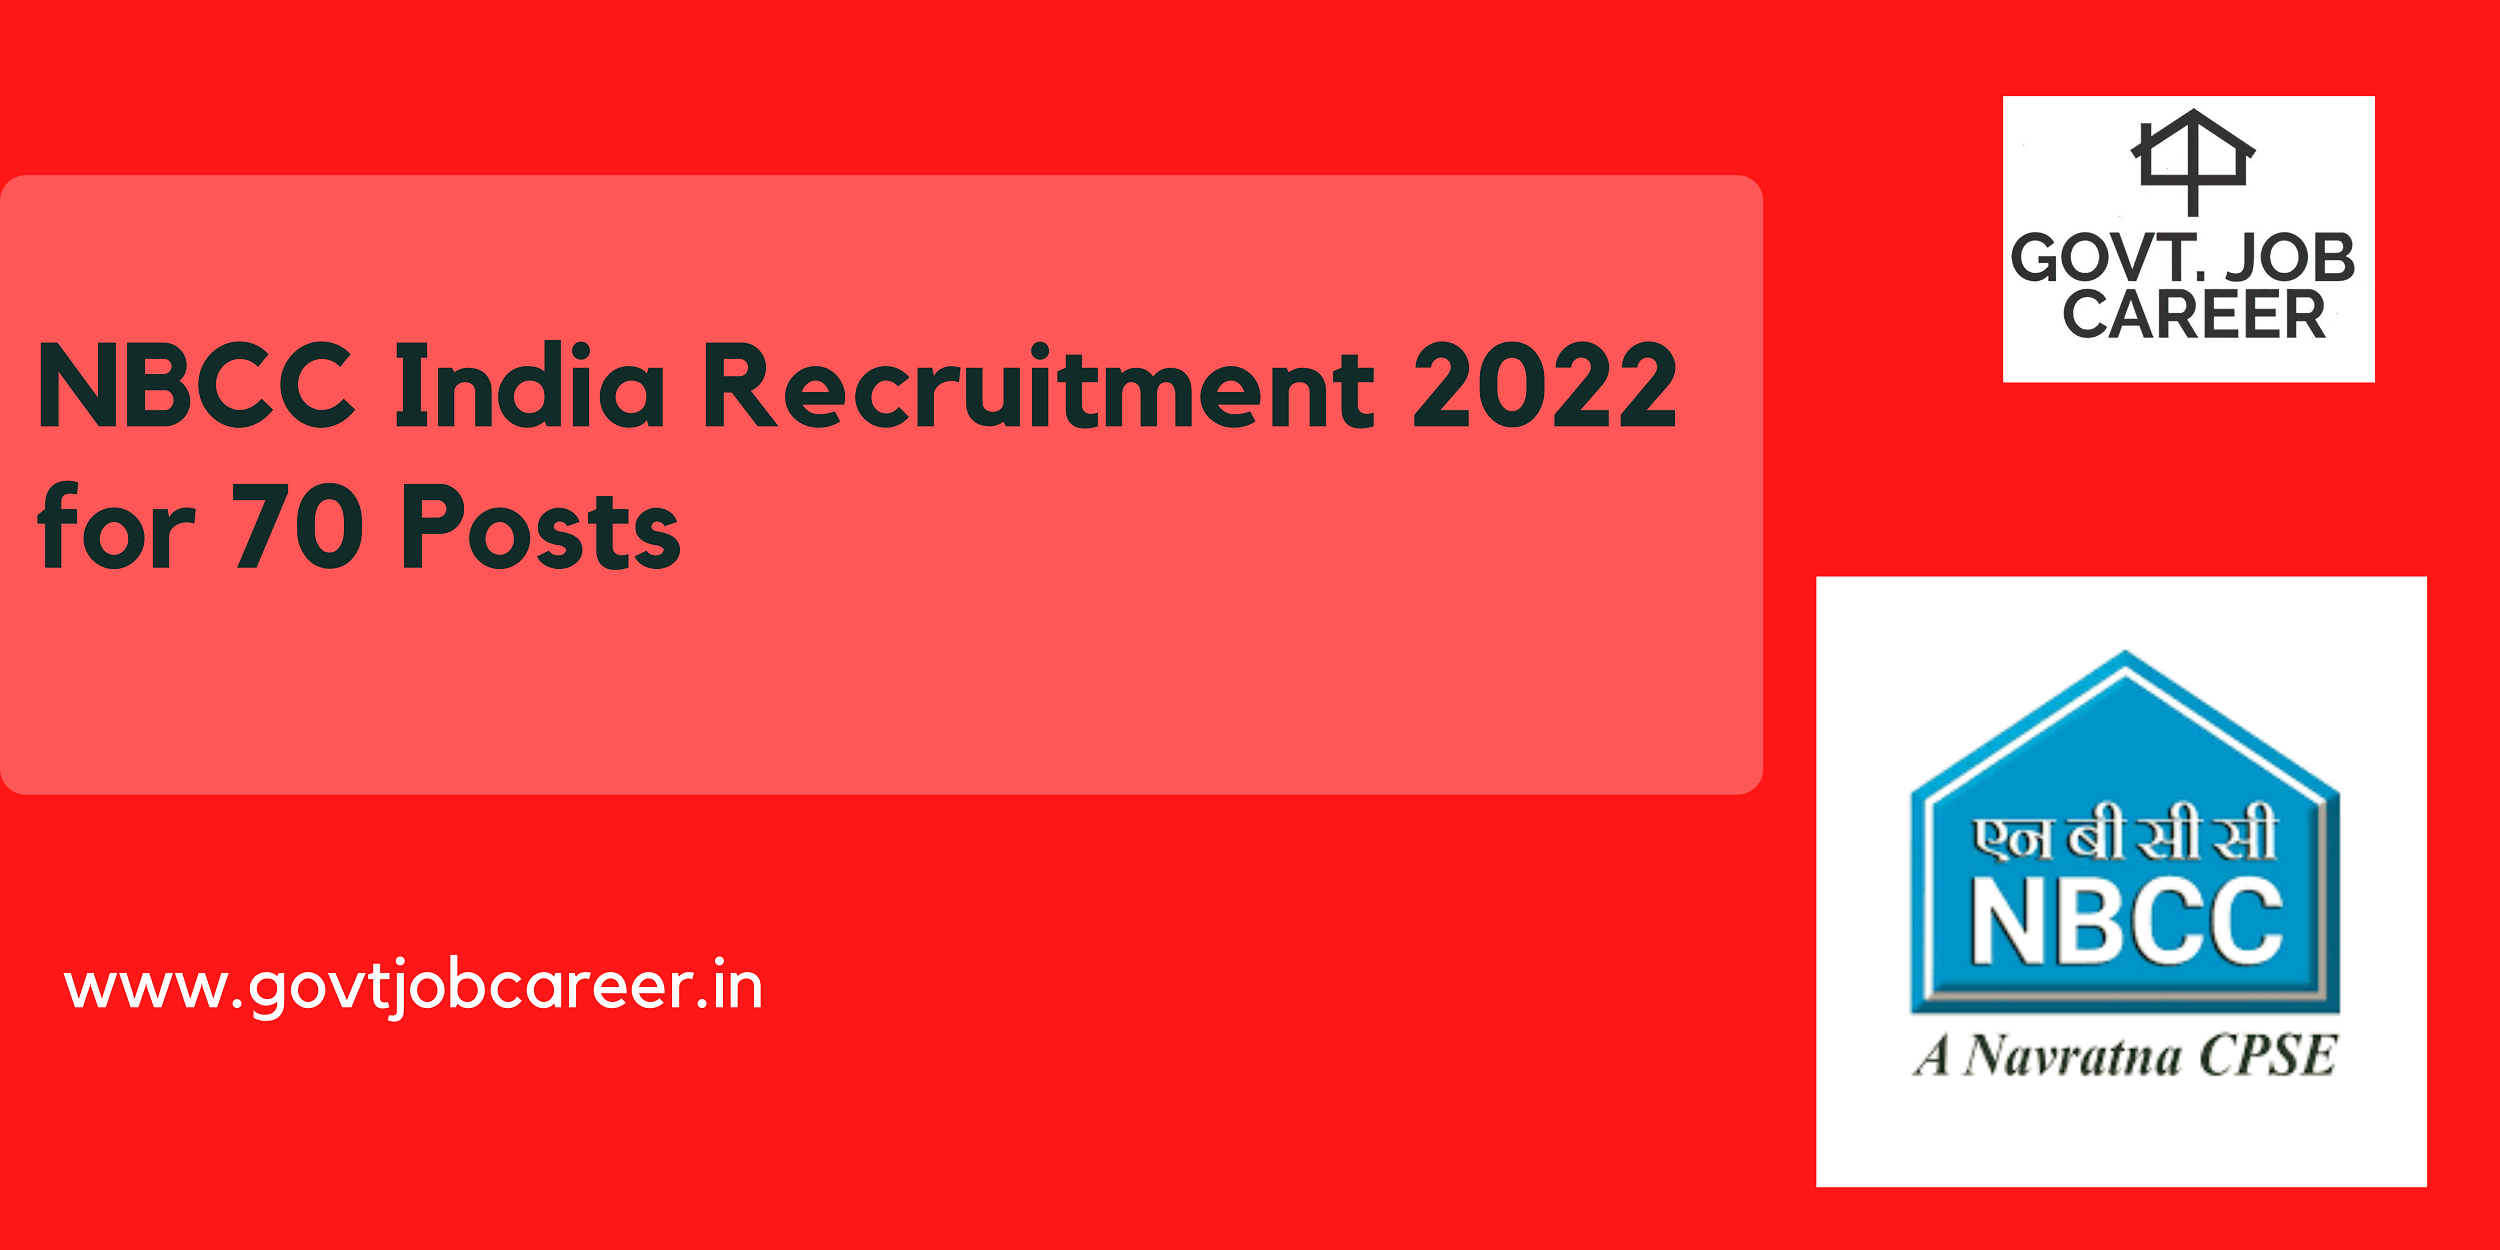 NBCC India Recruitment 2022 for 70 Posts